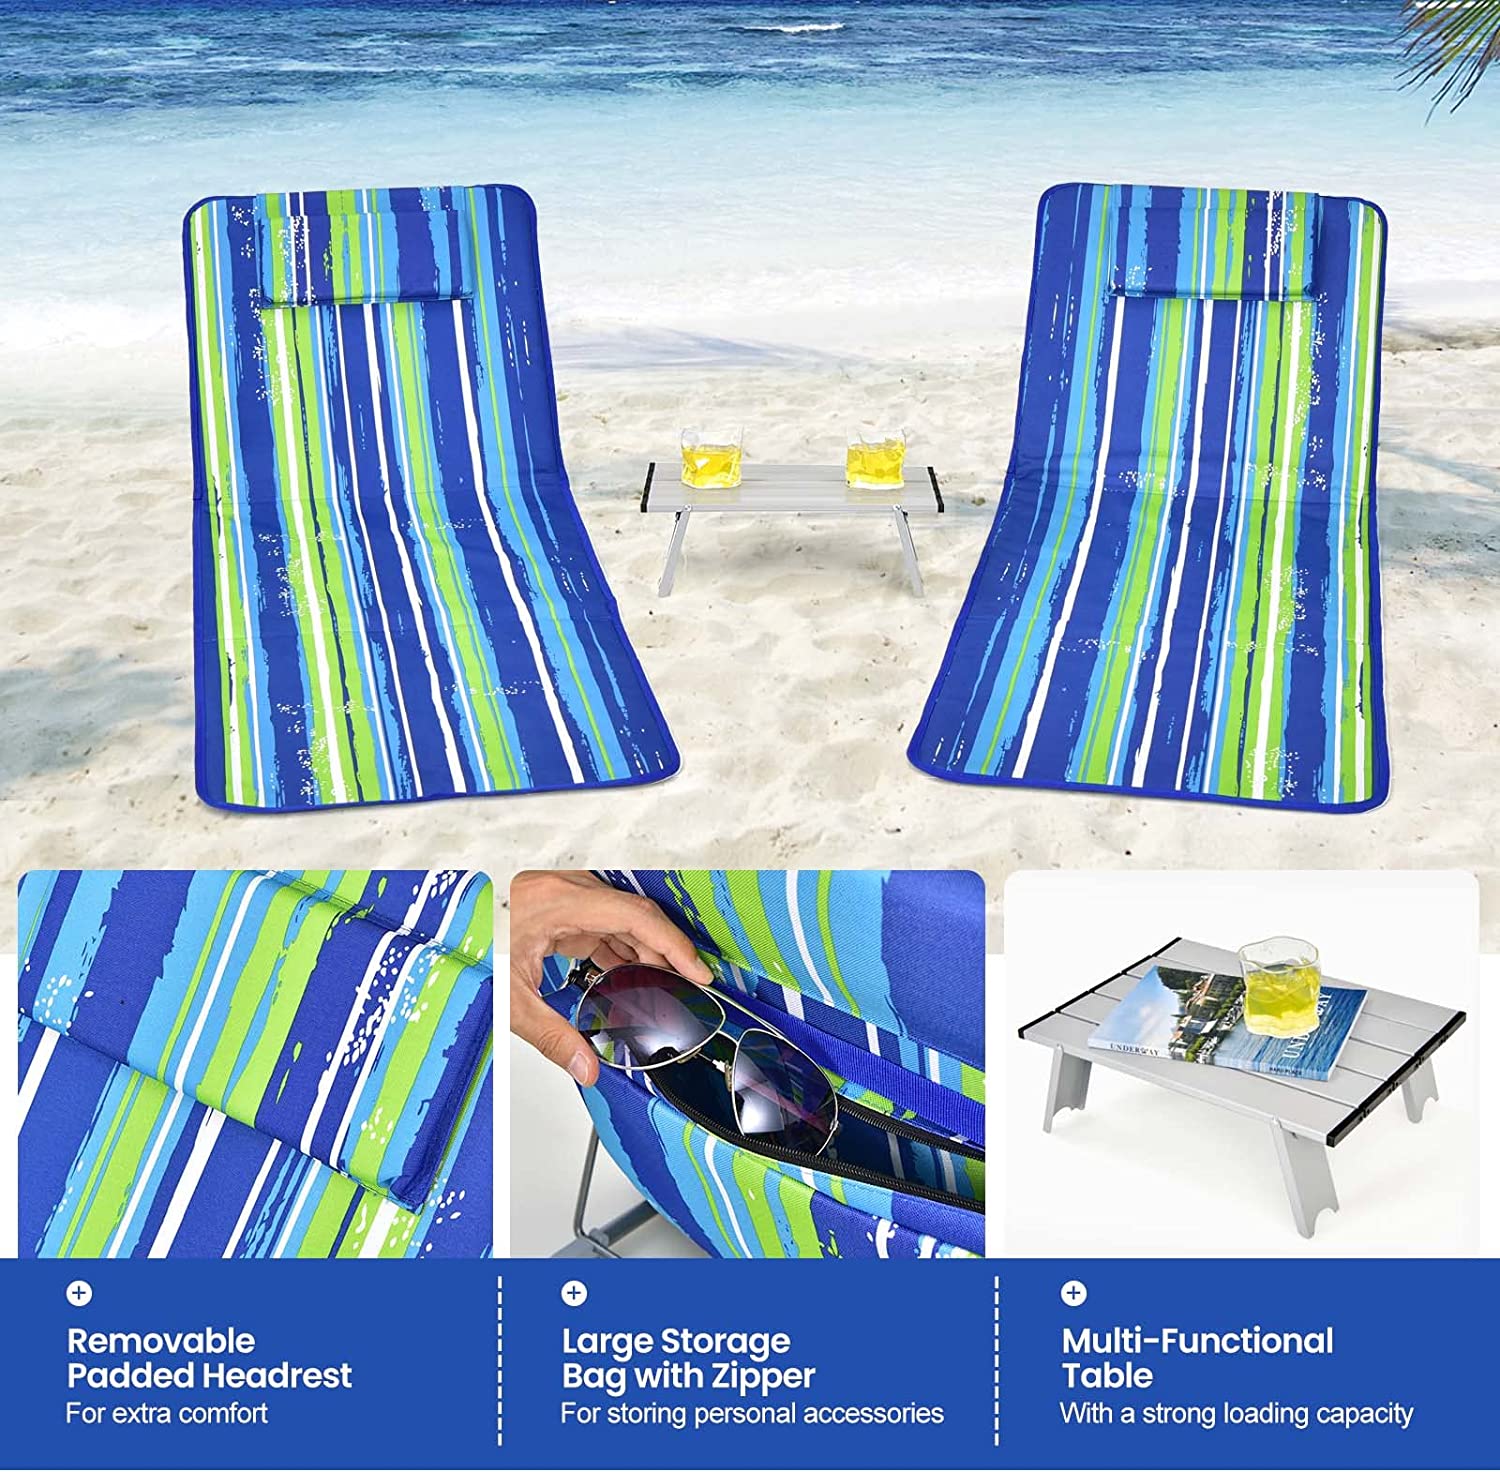 Beach Chairs for Adults with Side Table, Folding Lounge Chairs, 5 Position Adjustable Lawn Chair for Sunbathing, Camping, 2-Pack Set - image 4 of 9